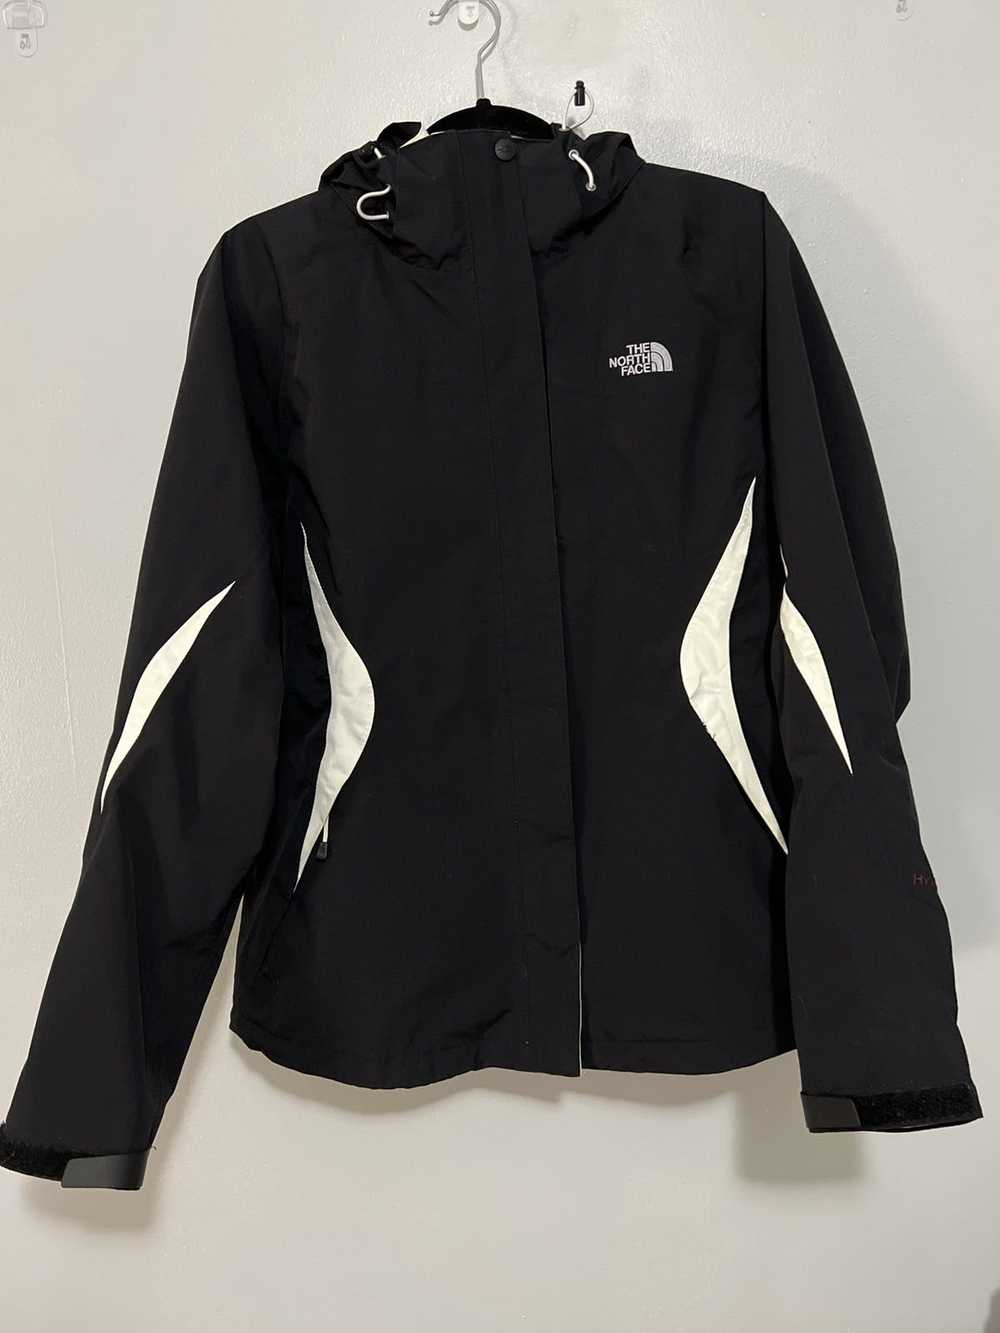 Vintage The North face Winter Jacket - image 2